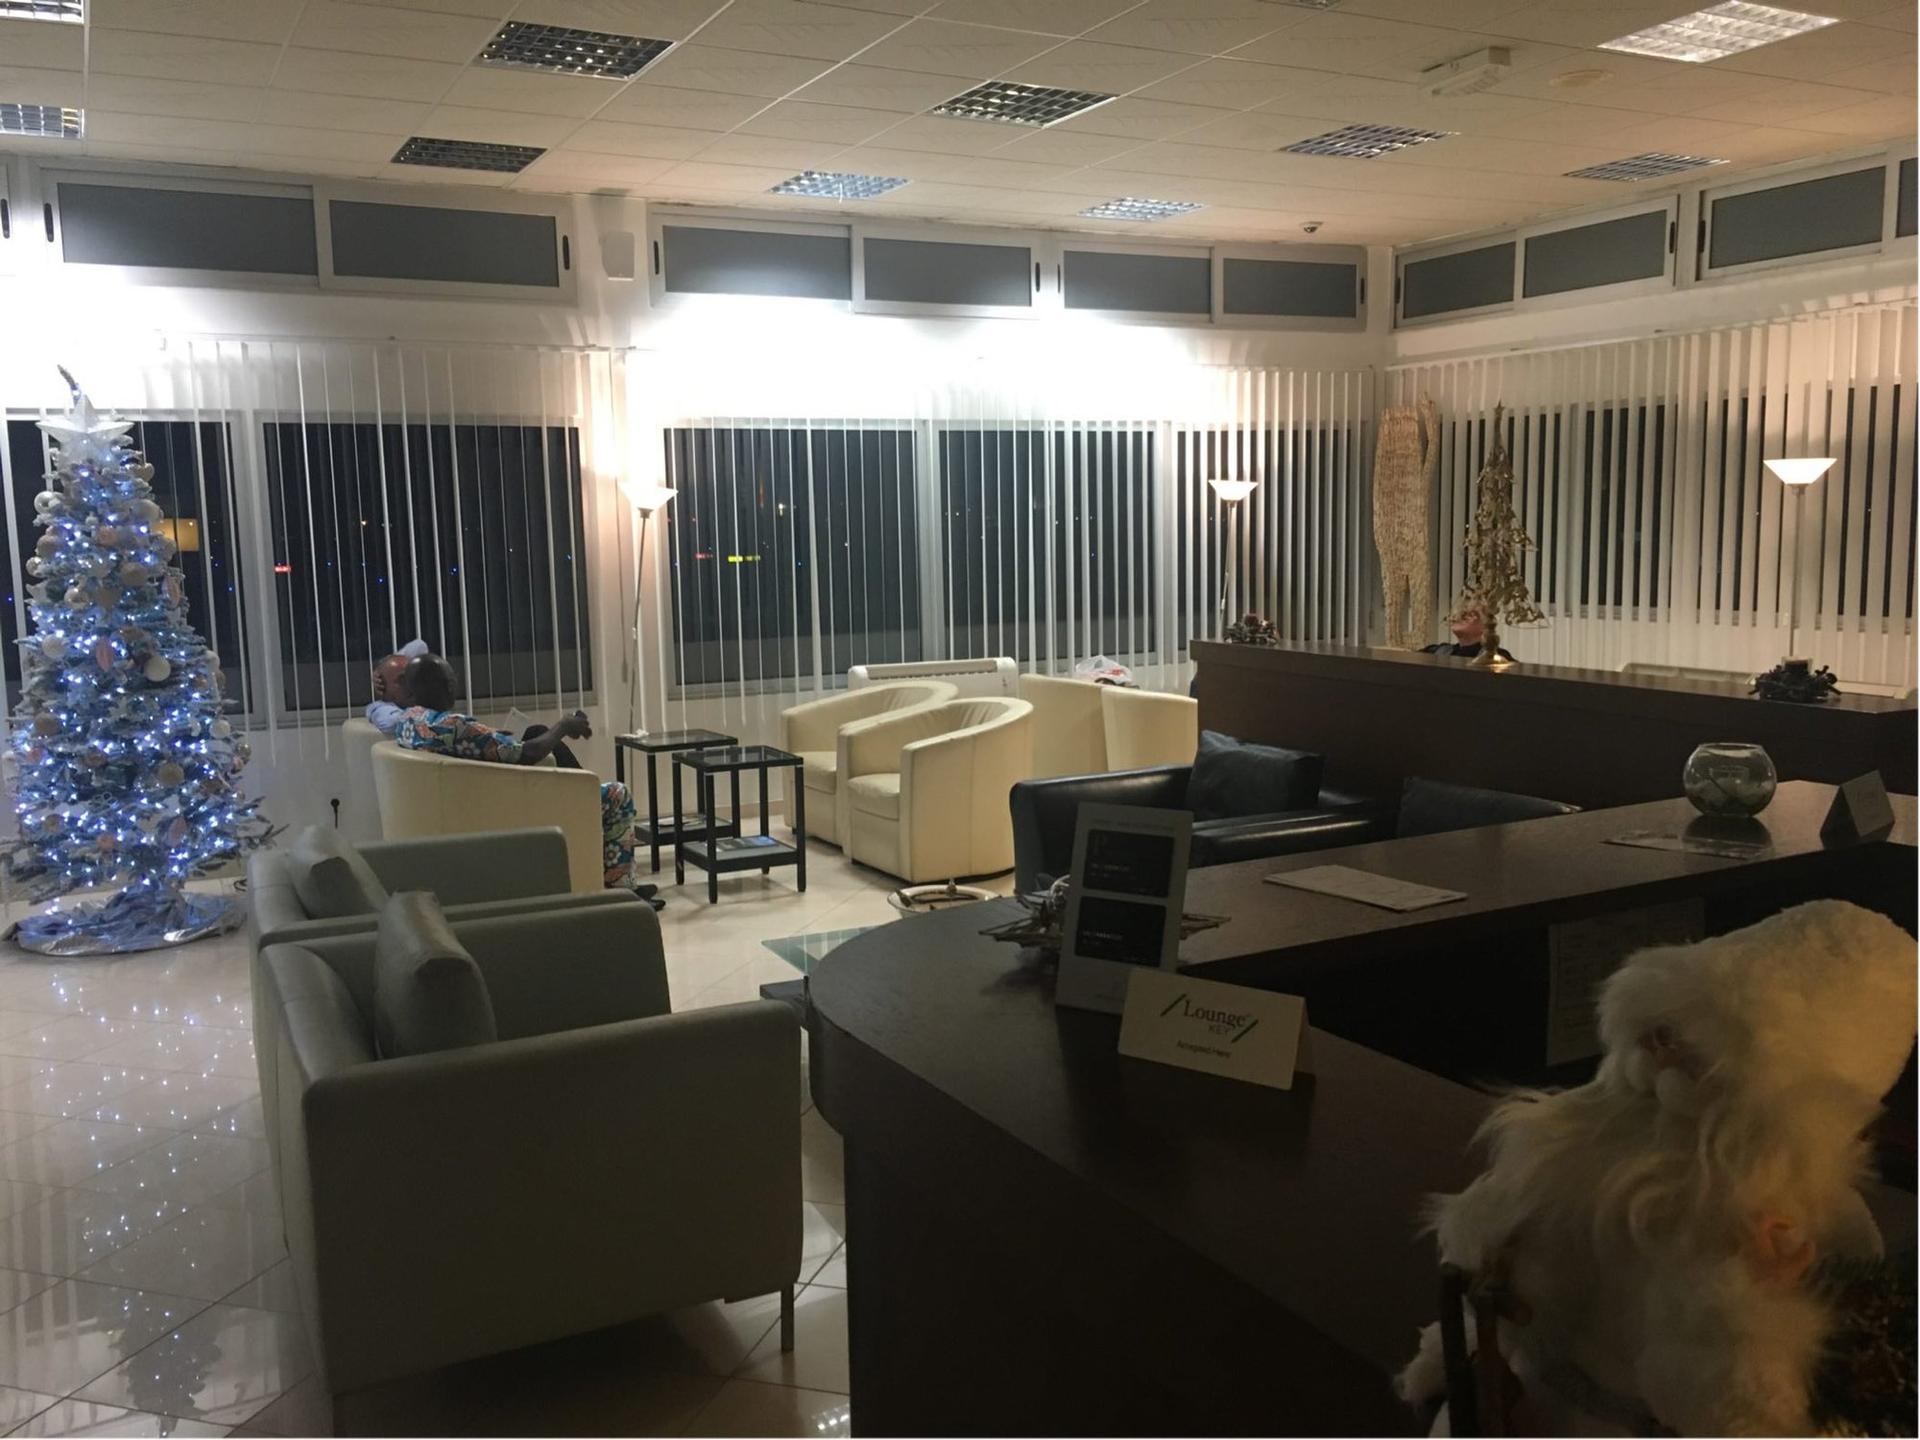 AHS Business Class Lounge image 1 of 5